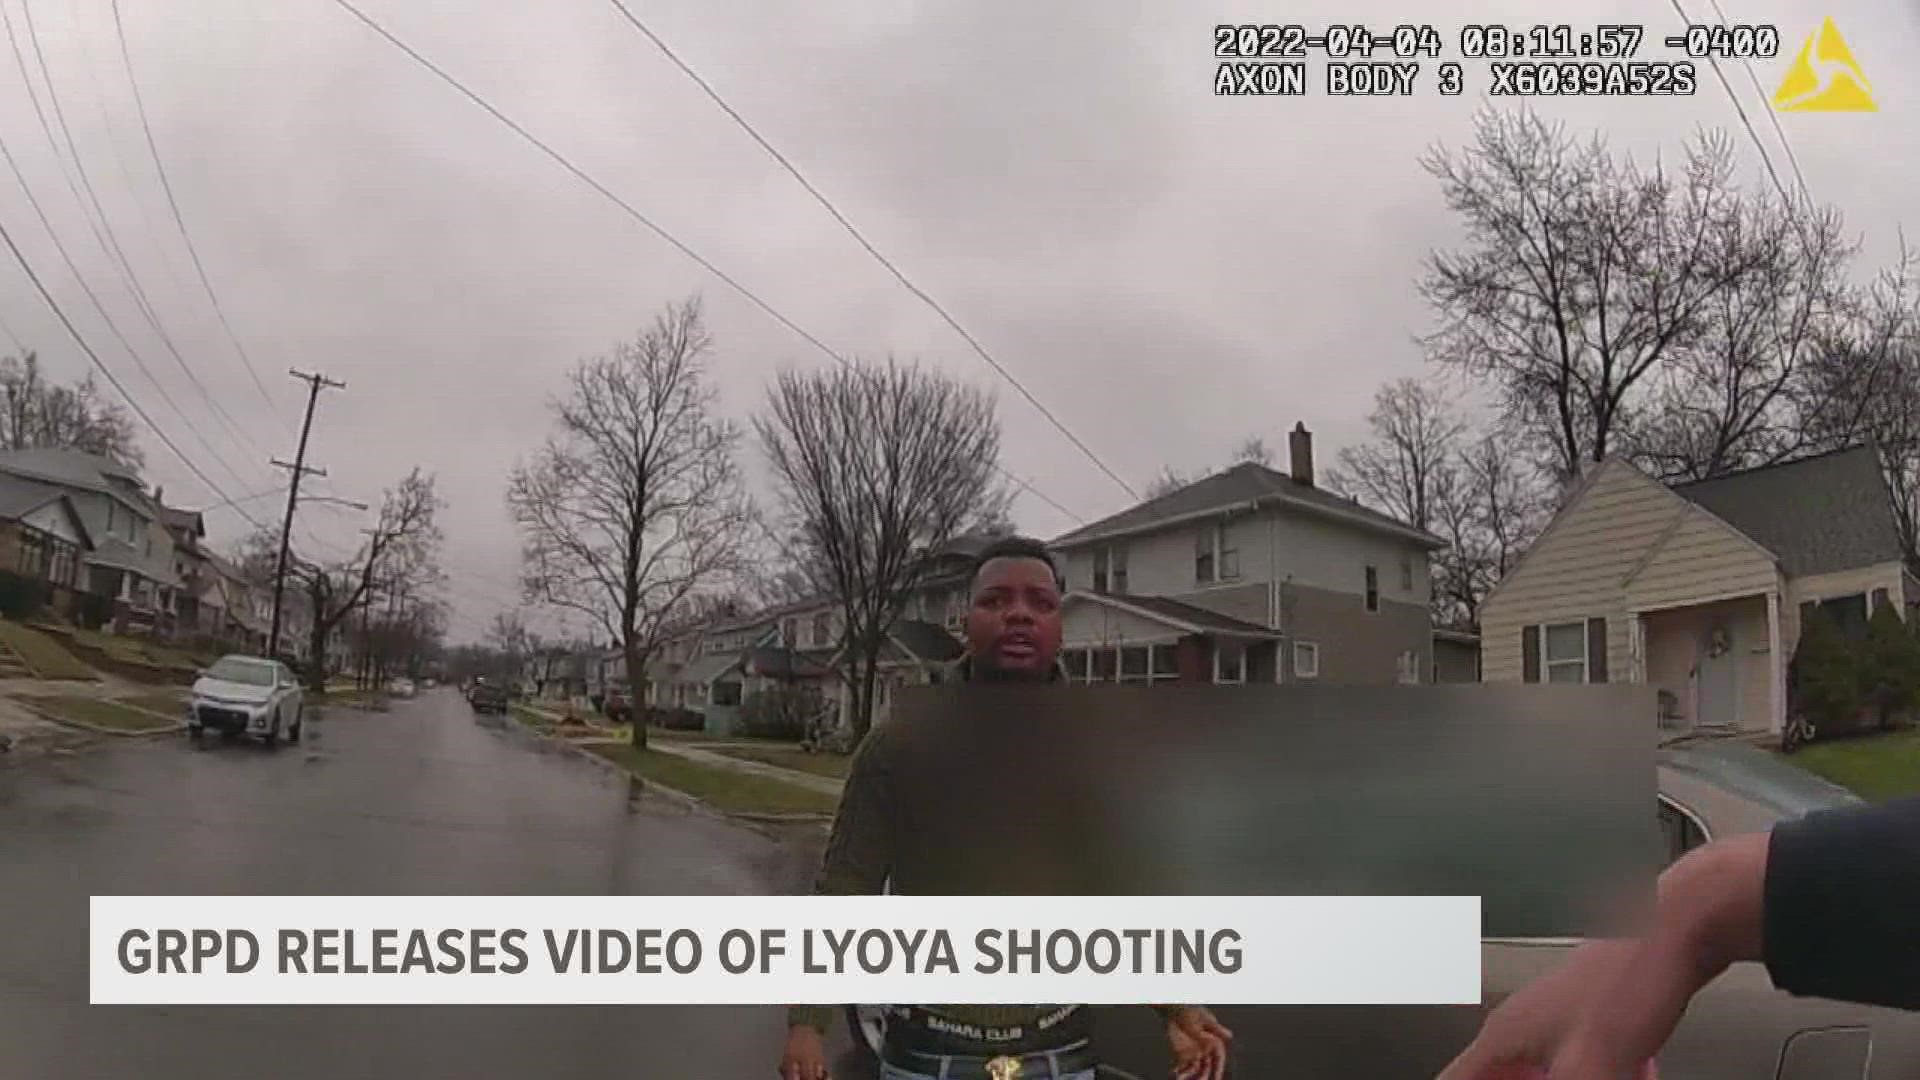 Police released the video of the shooting Wednesday afternoon.